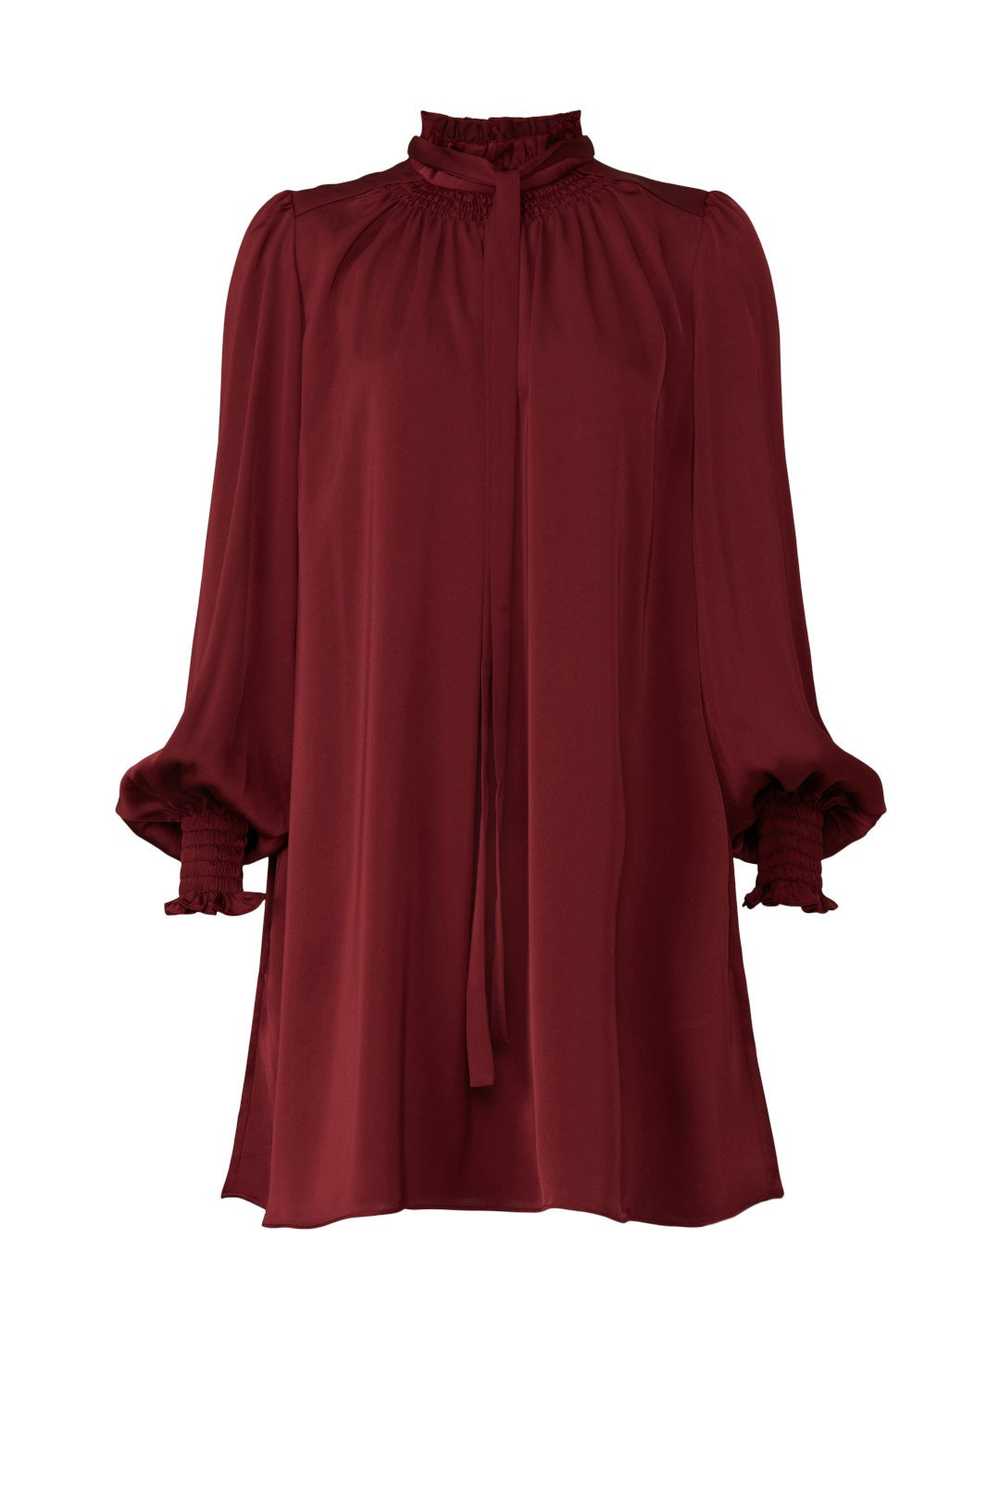 Adam Lippes Collective Ruffle Neck Charmeuse Dress - image 5